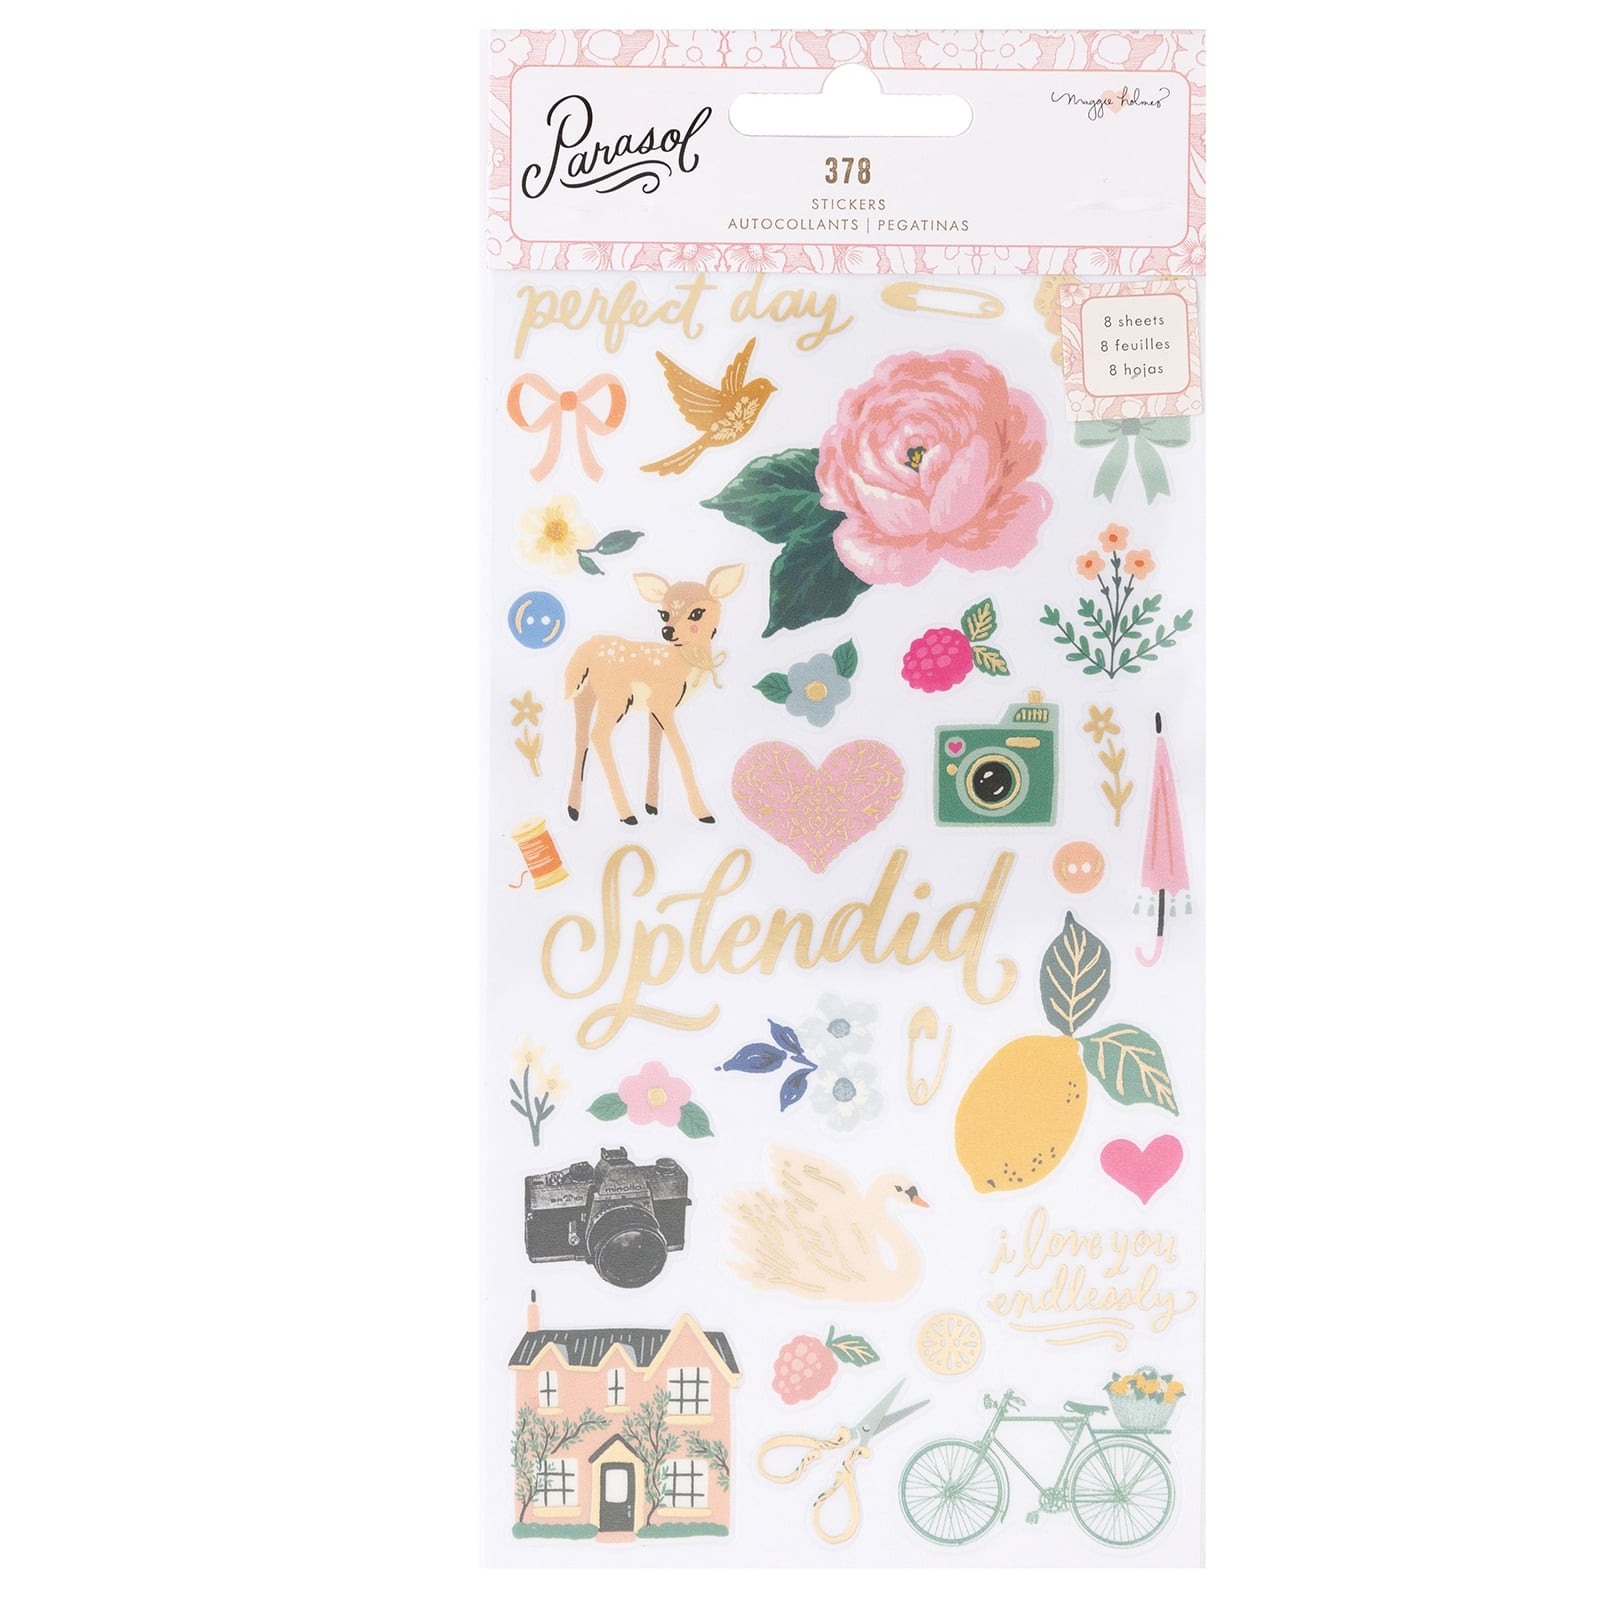 Maggie Holmes Parasol Sticker Book with Gold Foil Accents